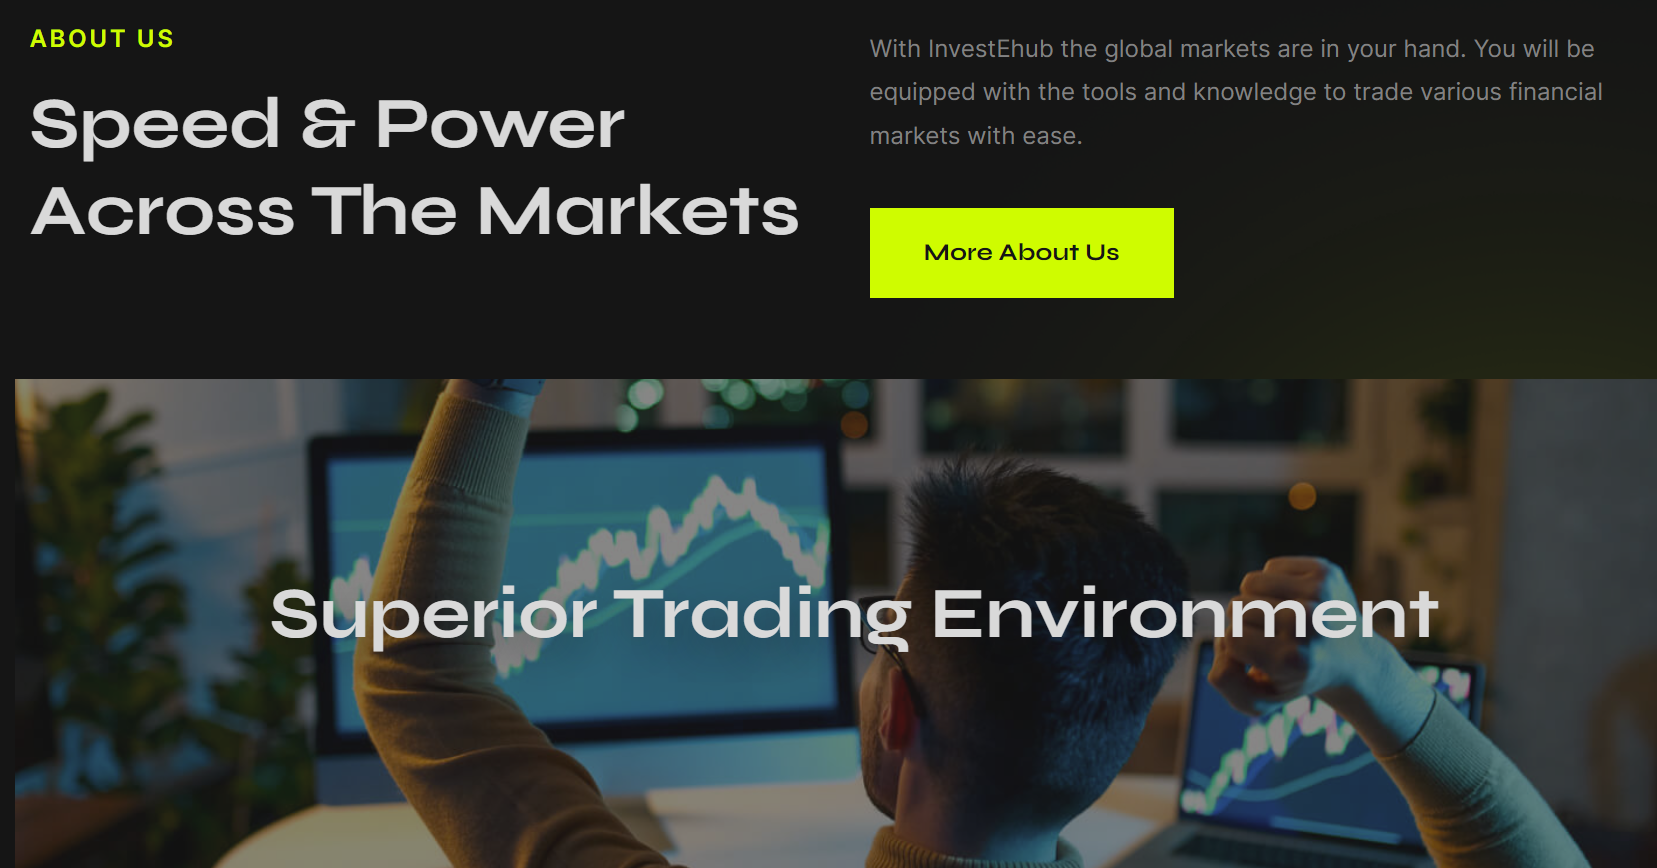  Invest Ehub and global markets